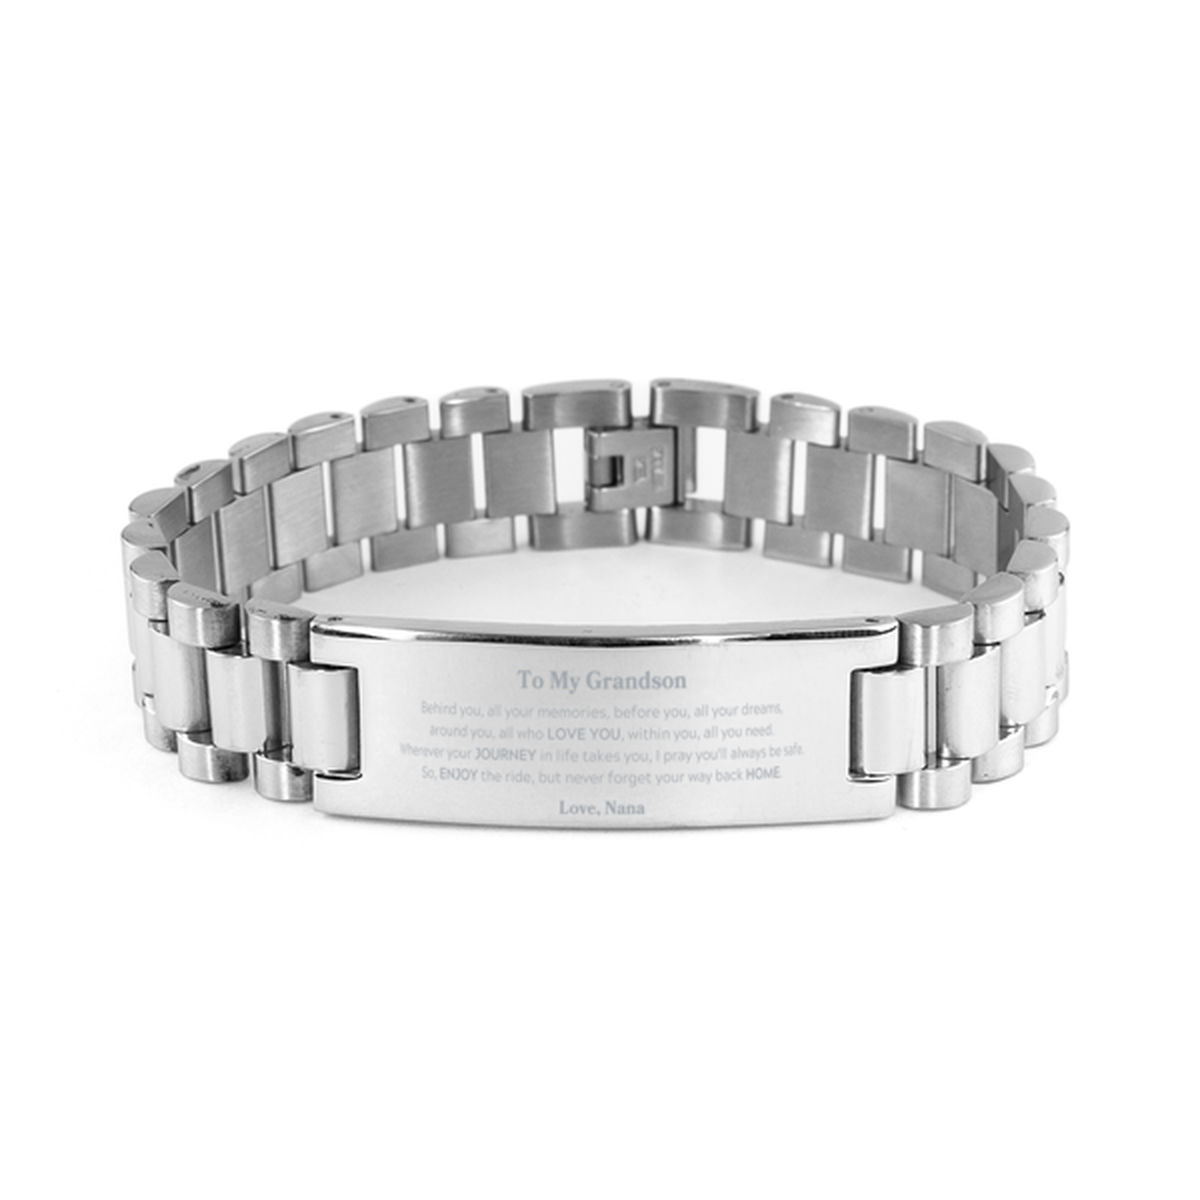 To My Grandson Graduation Gifts from Nana, Grandson Ladder Stainless Steel Bracelet Christmas Birthday Gifts for Grandson Behind you, all your memories, before you, all your dreams. Love, Nana